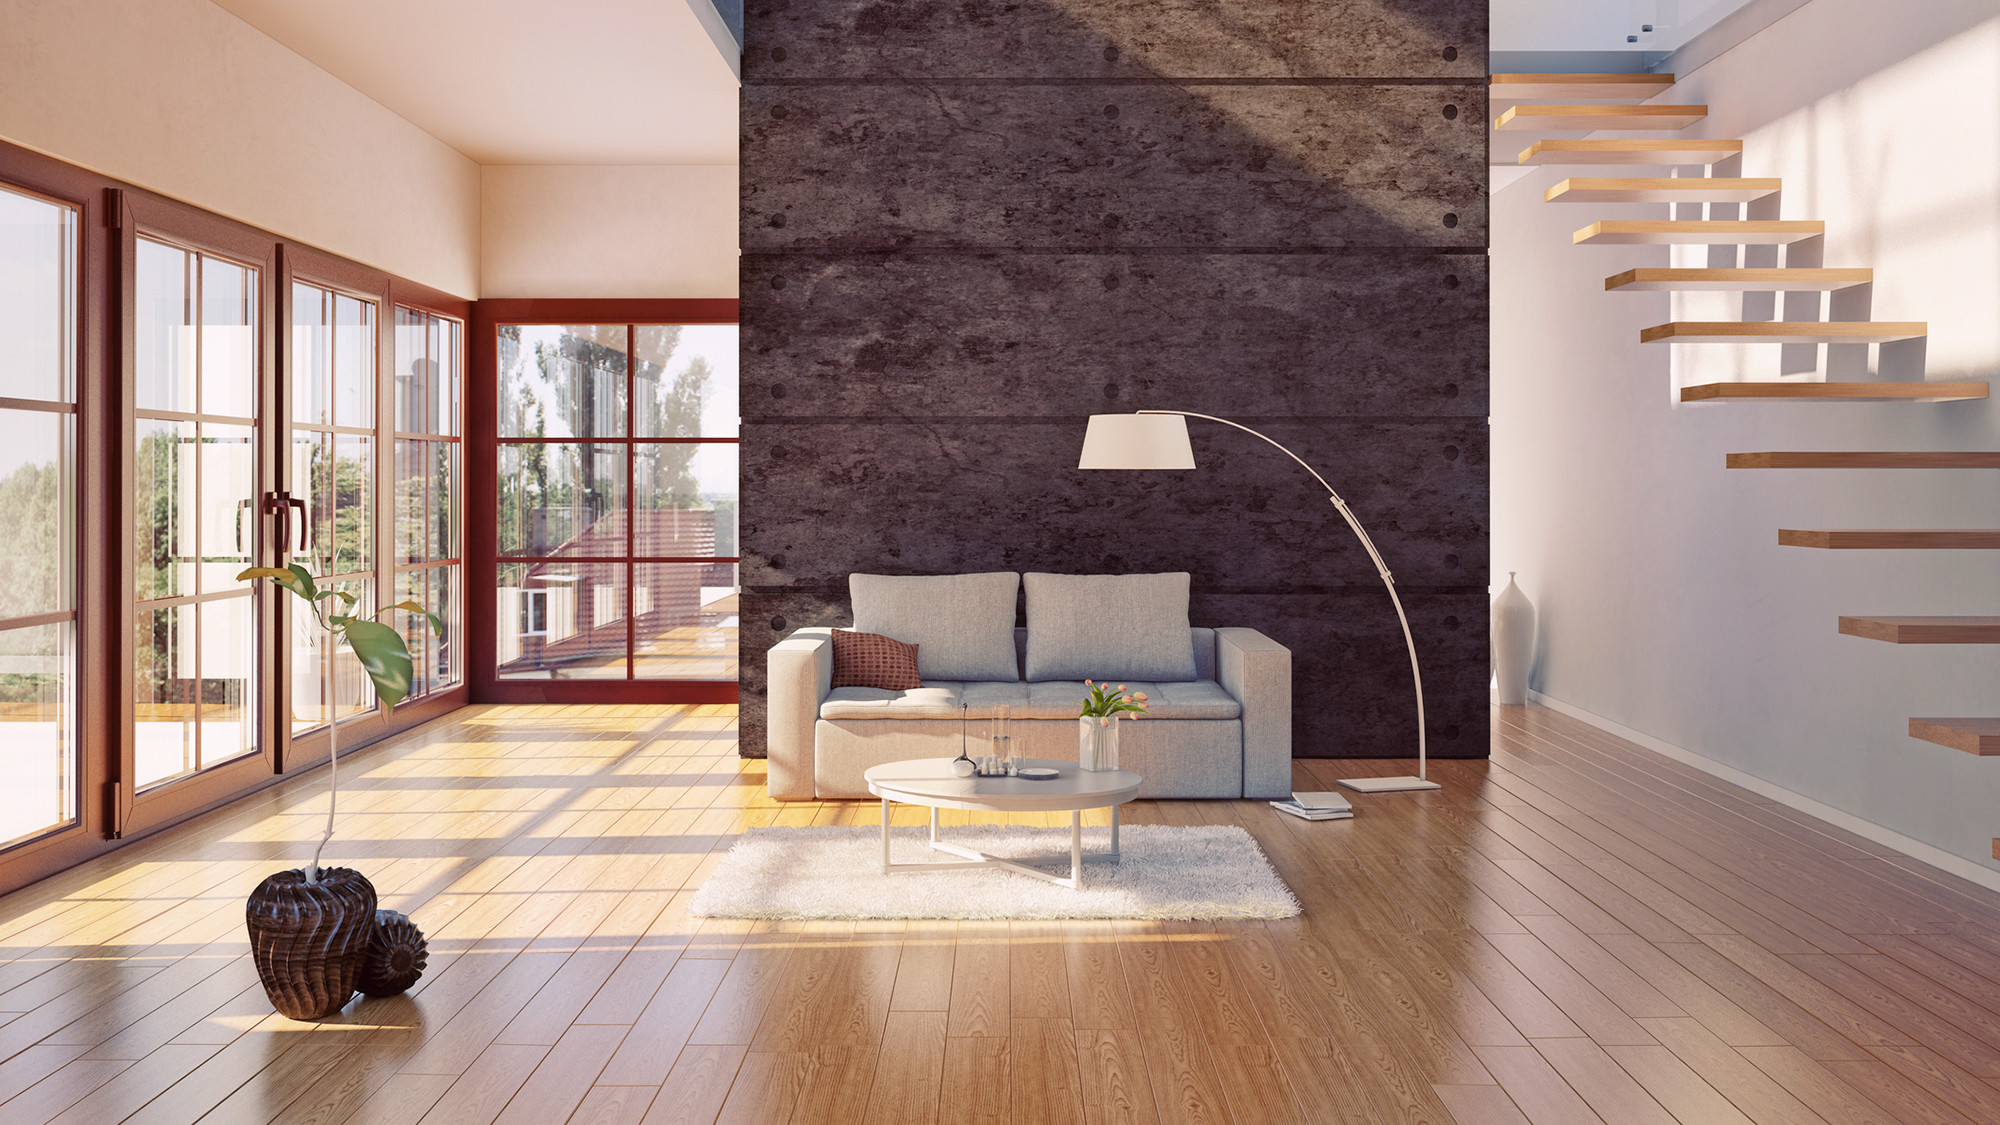 14 Recommended Average Price Per Square Foot for Hardwood Floor Installation 2024 free download average price per square foot for hardwood floor installation of do hardwood floors provide the best return on investment realtor coma inside hardwood floors investment